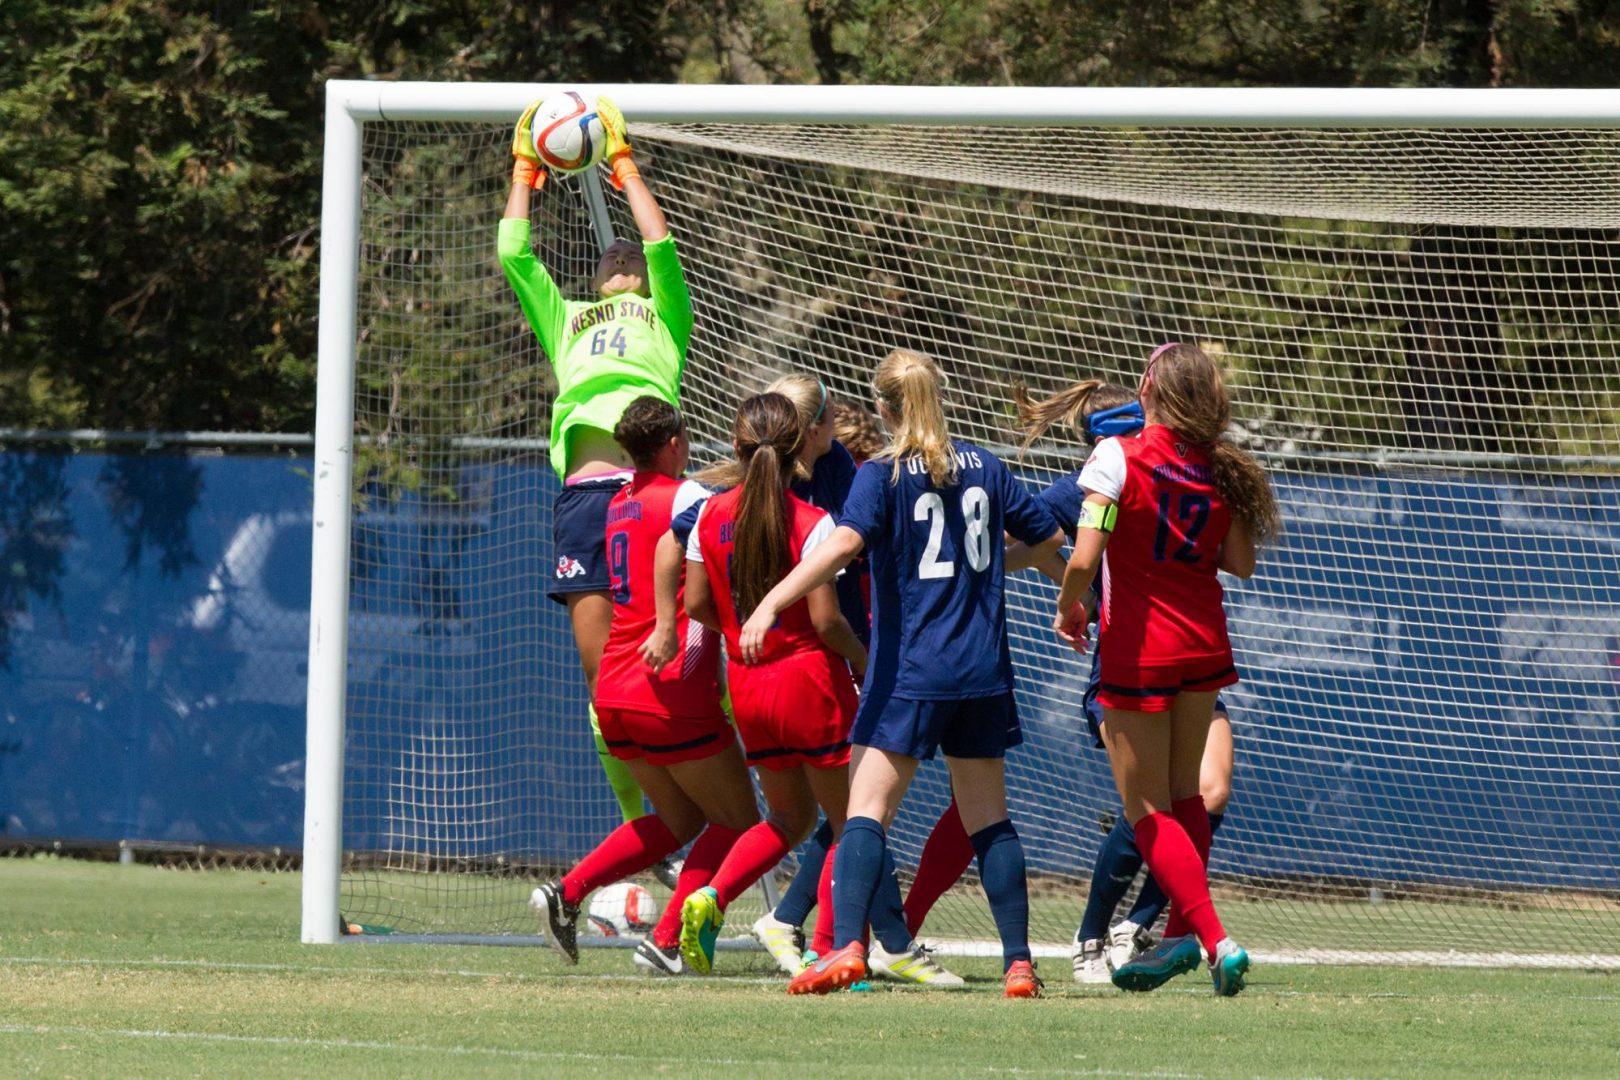 Nicole Theroux blocks a goal  against the Aggies as part of her career-high 11 saves. (Fresno State Athletics)